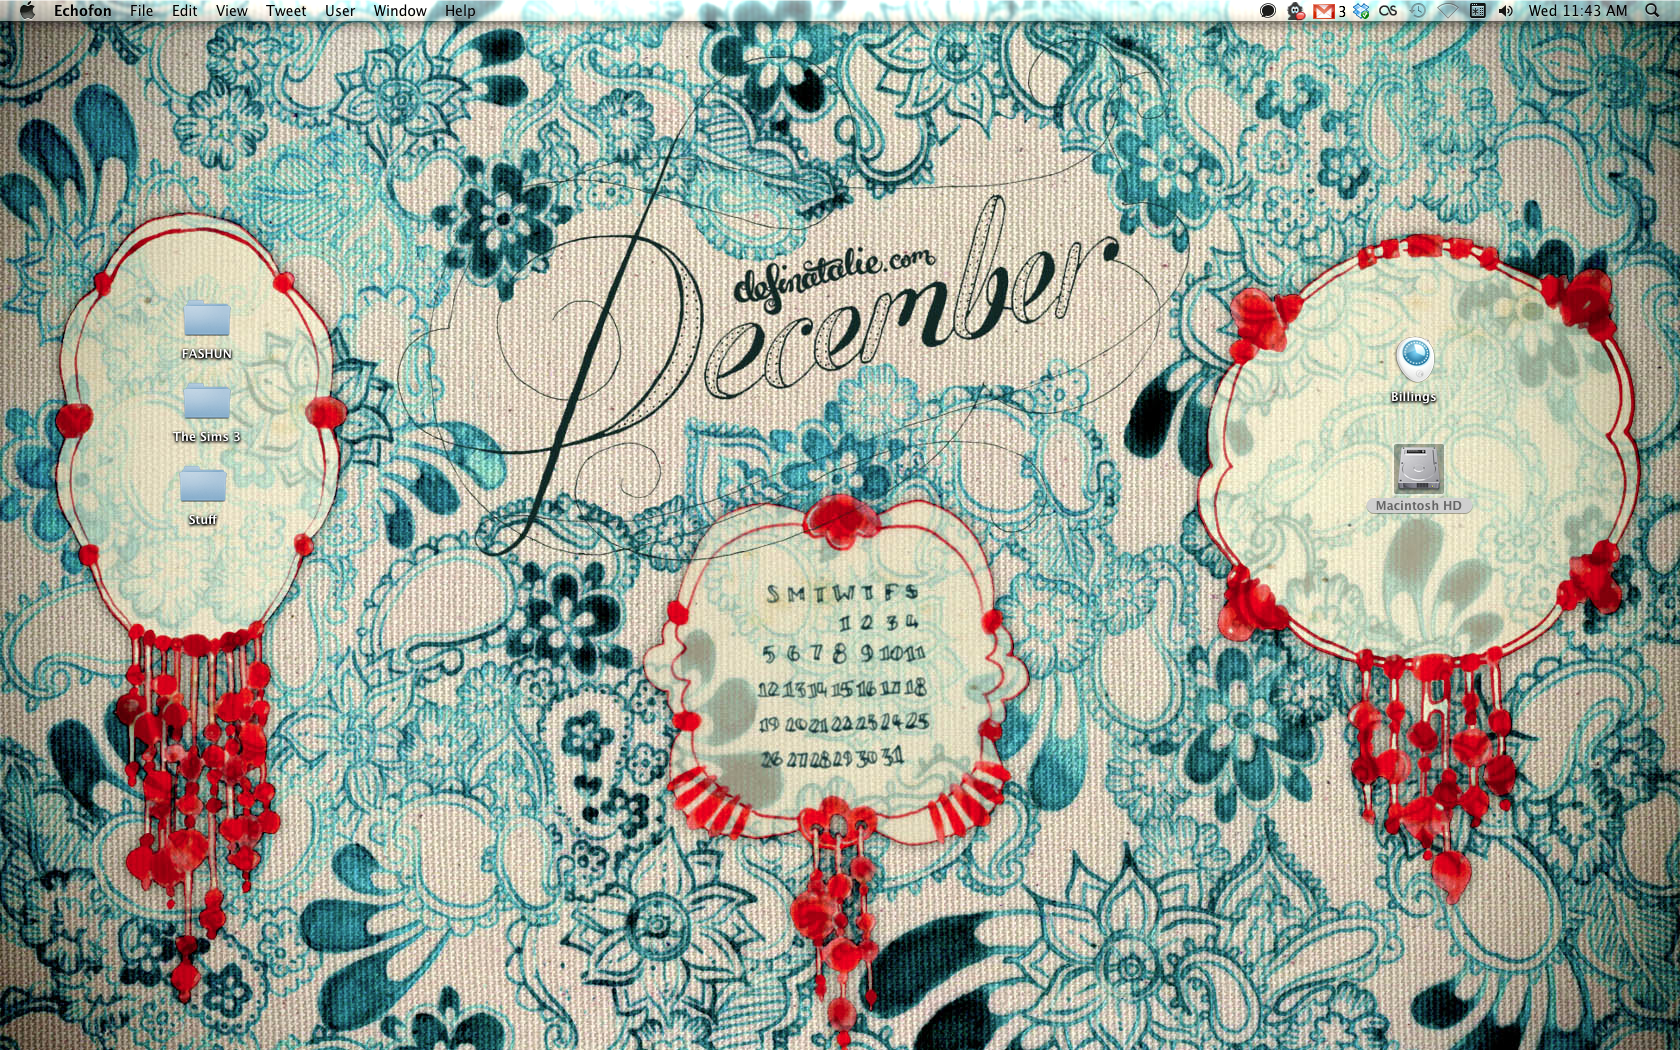 A computer wallpaper with paisley doodling all over the background in turquoise ink with three choral inked shapes (for holding icons) and a fancy "December" written in the middle.